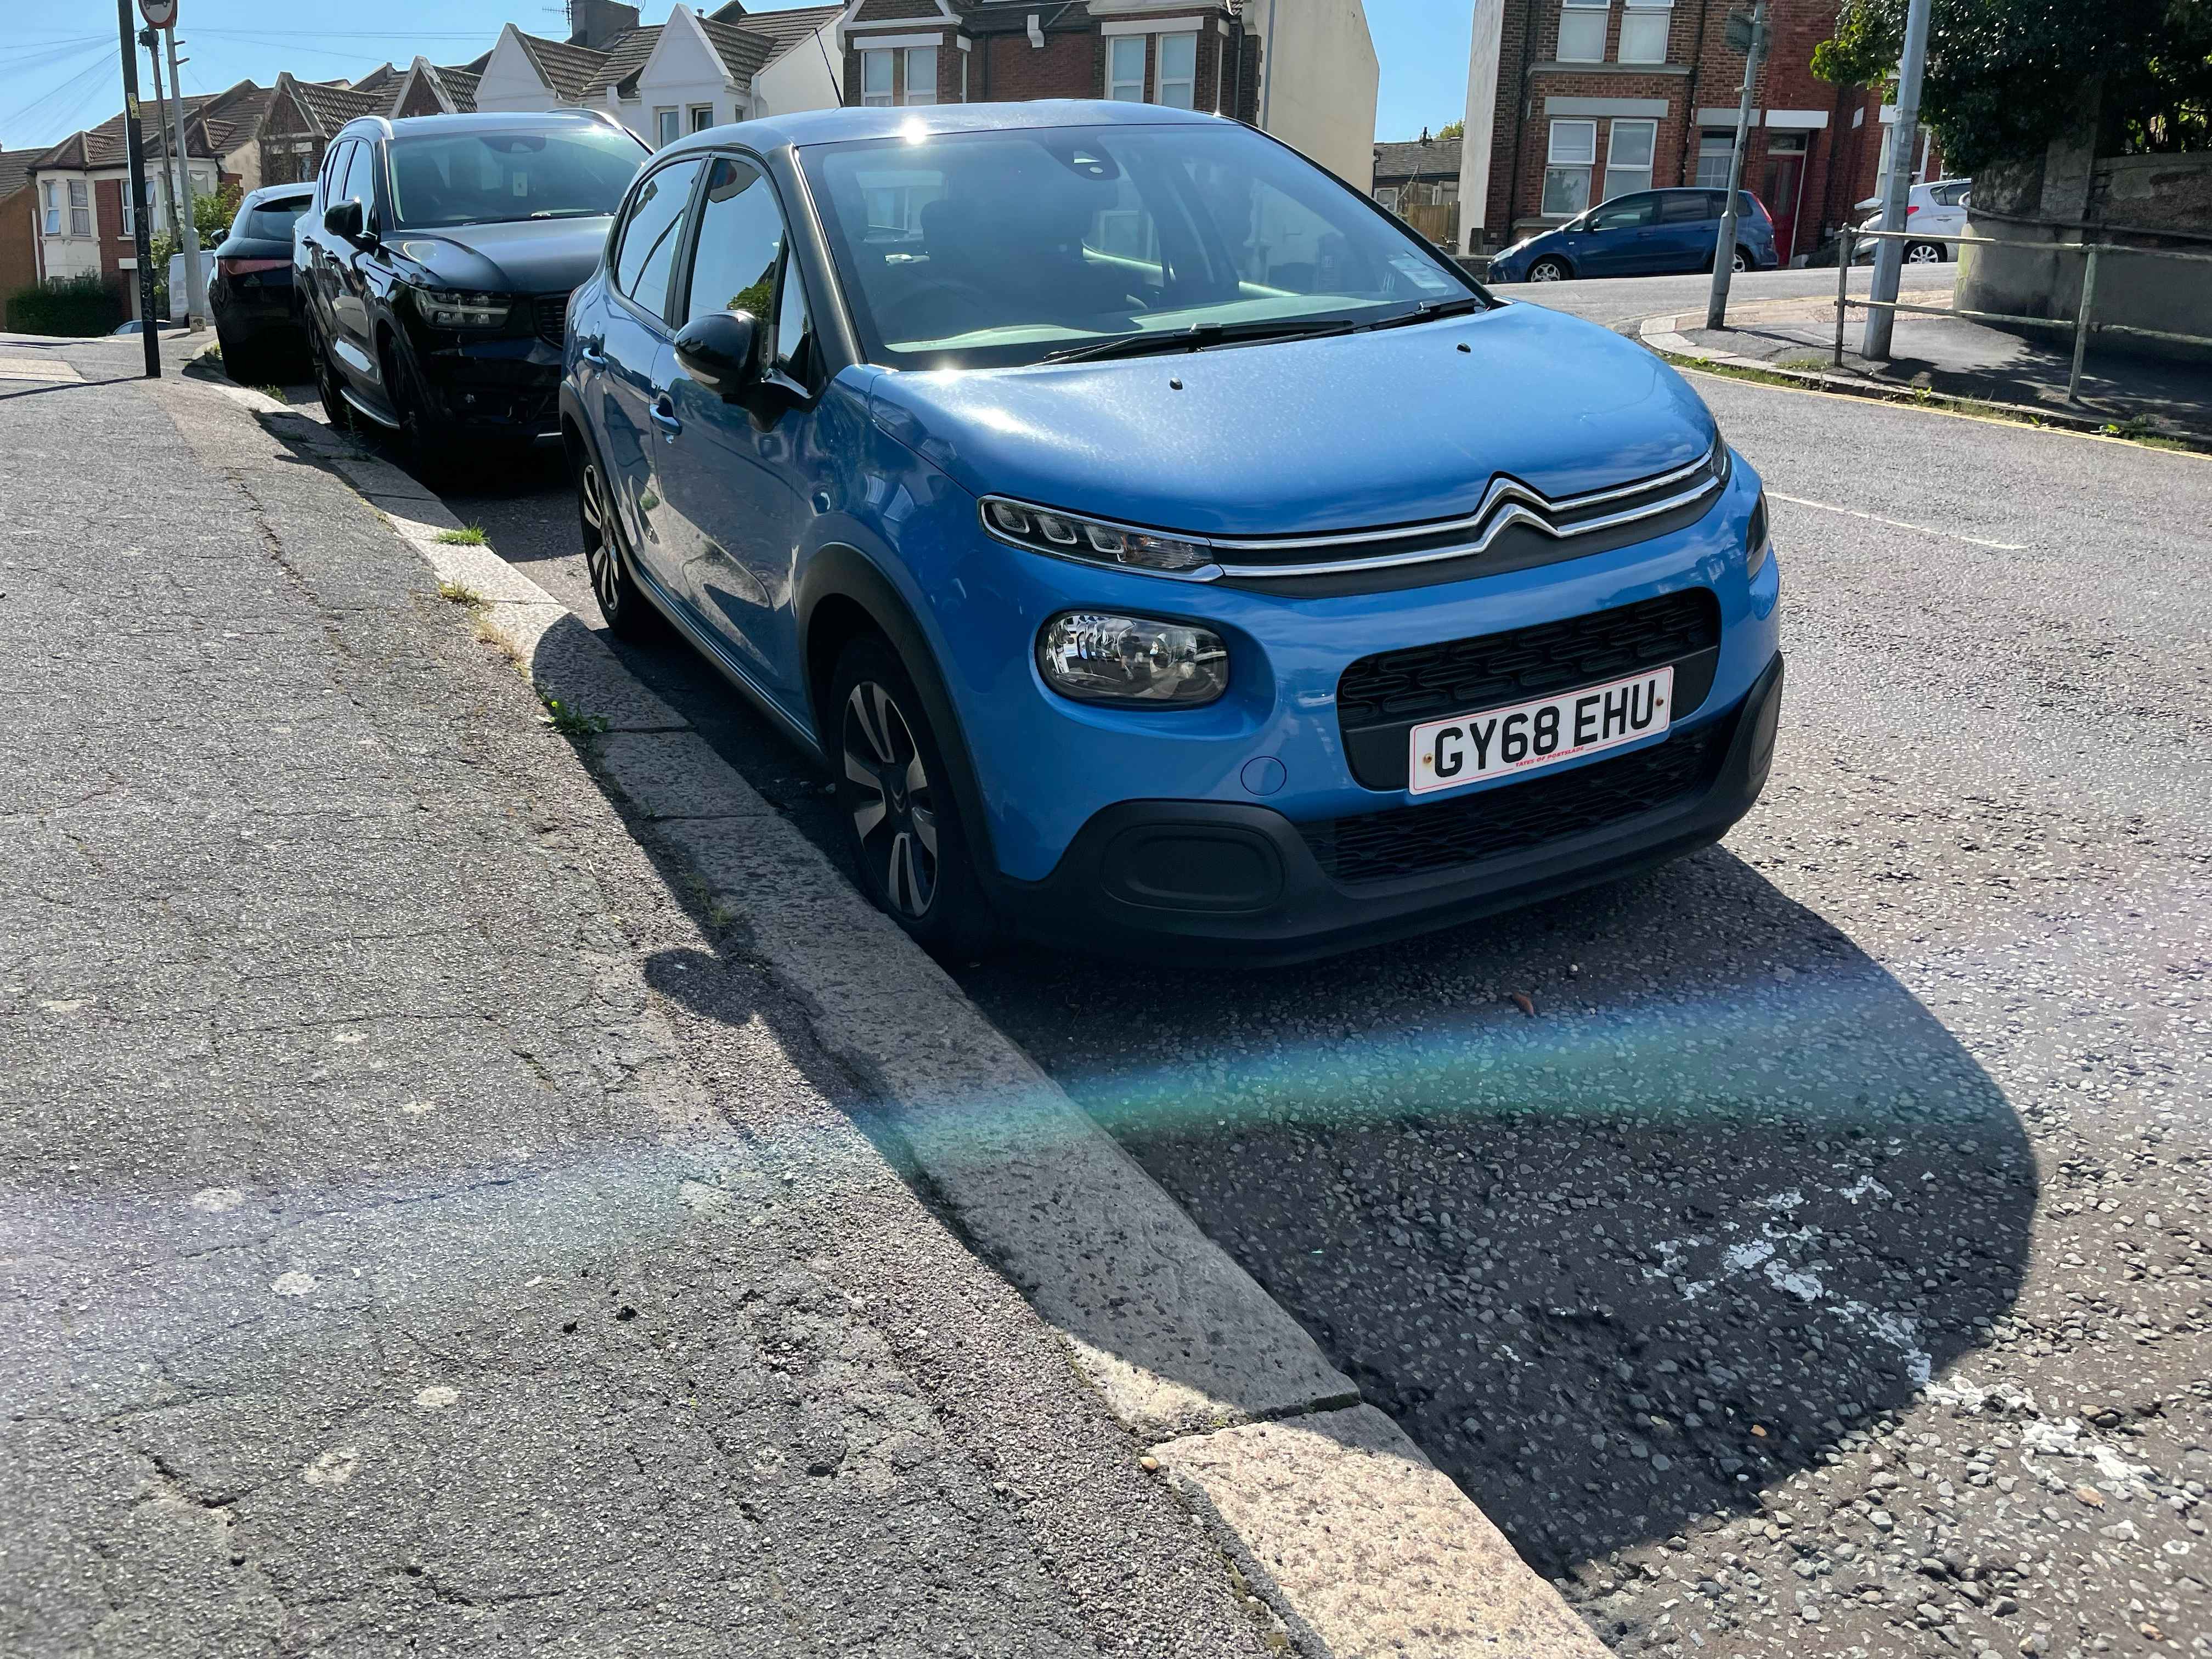 Photograph of GY68 EHU - a Blue Citroen C3 parked in Hollingdean by a non-resident who uses the local area as part of their Brighton commute. The first of twelve photographs supplied by the residents of Hollingdean.